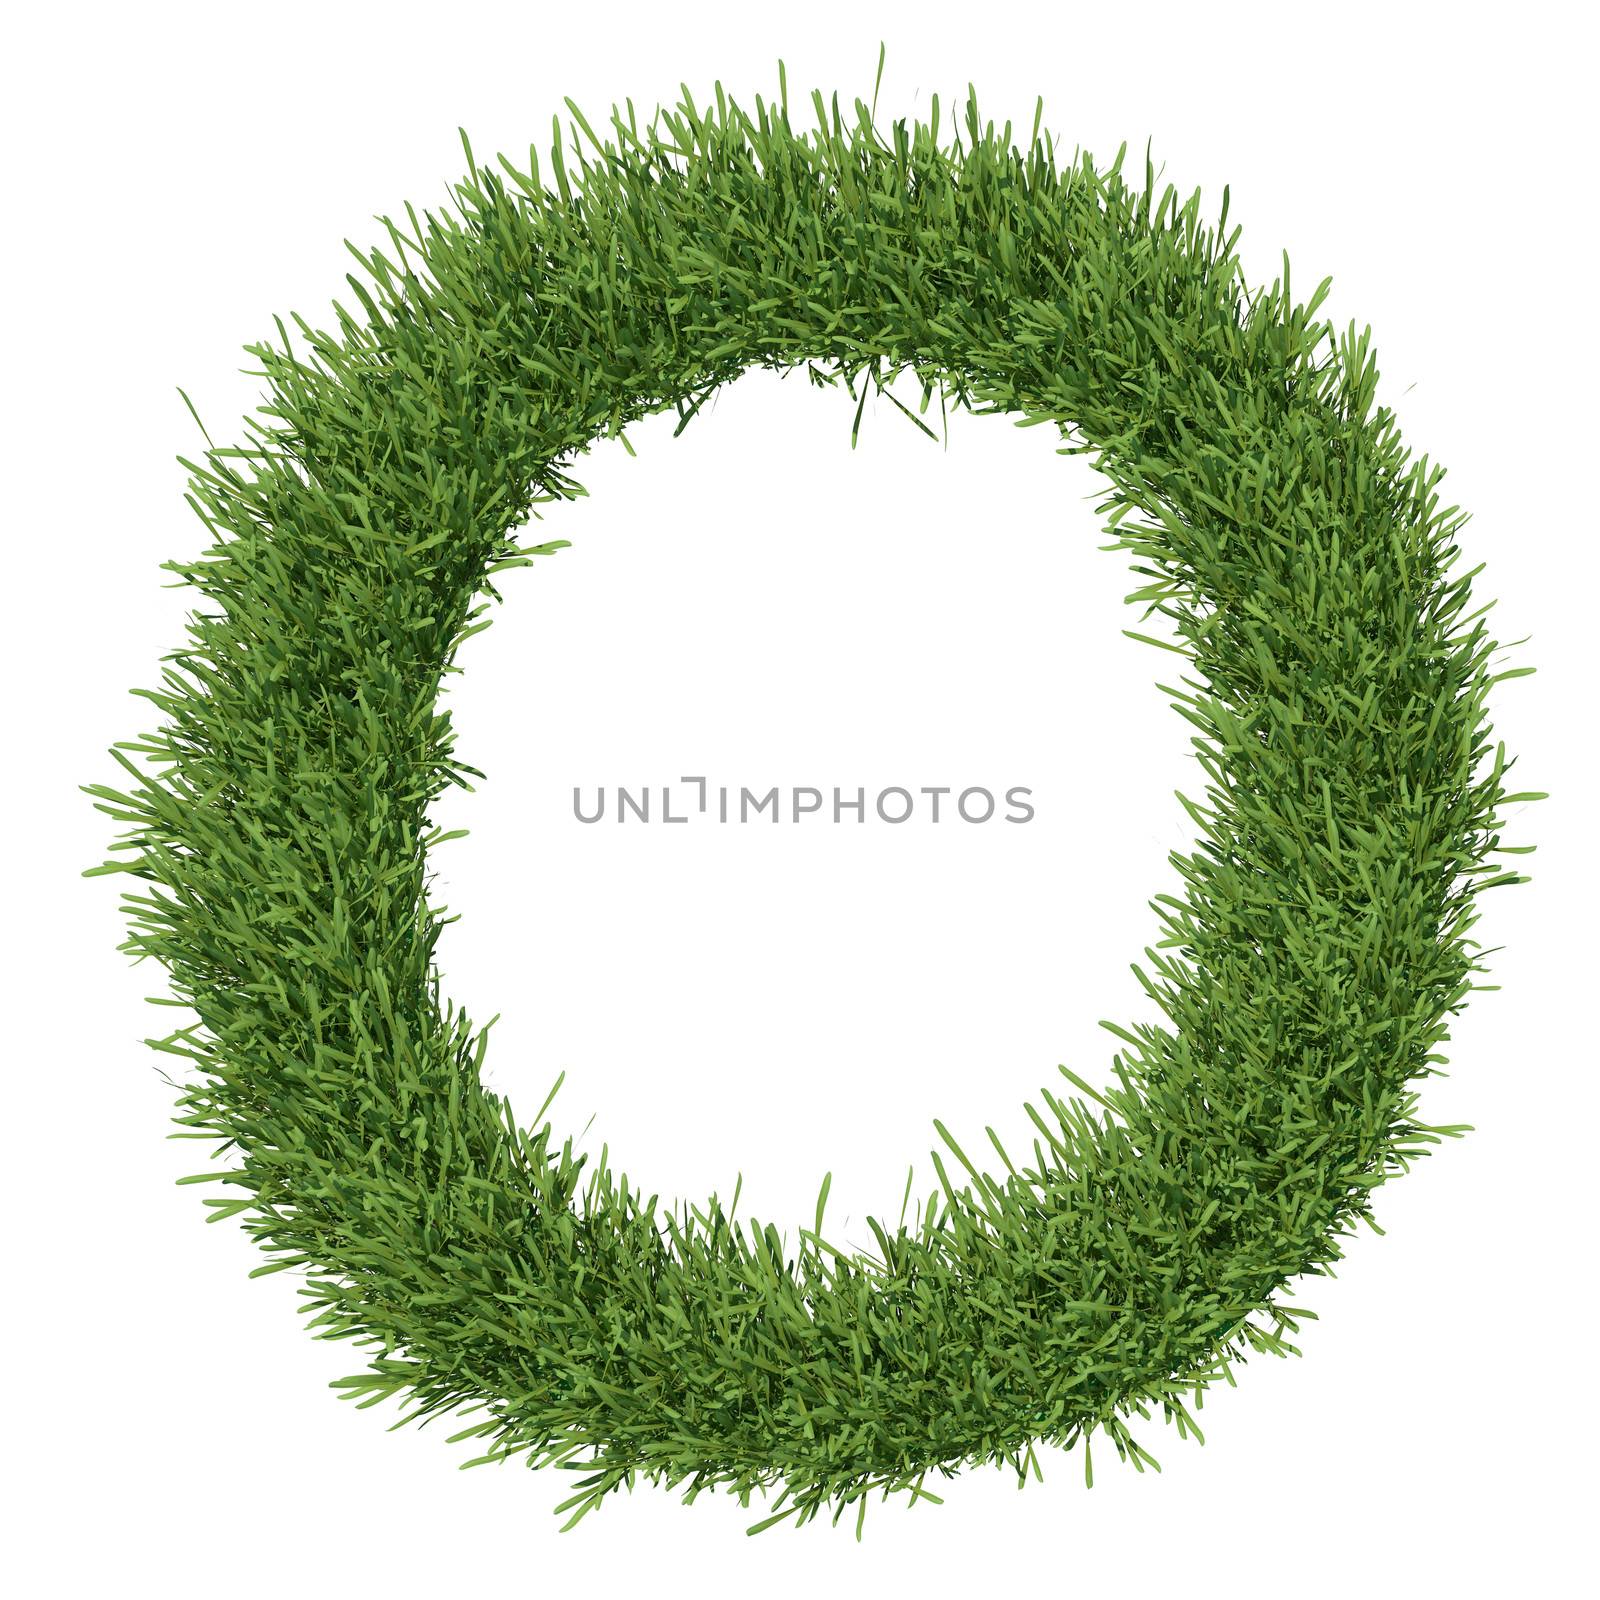 Letter of the alphabet made from grass. Isolated render on a white background